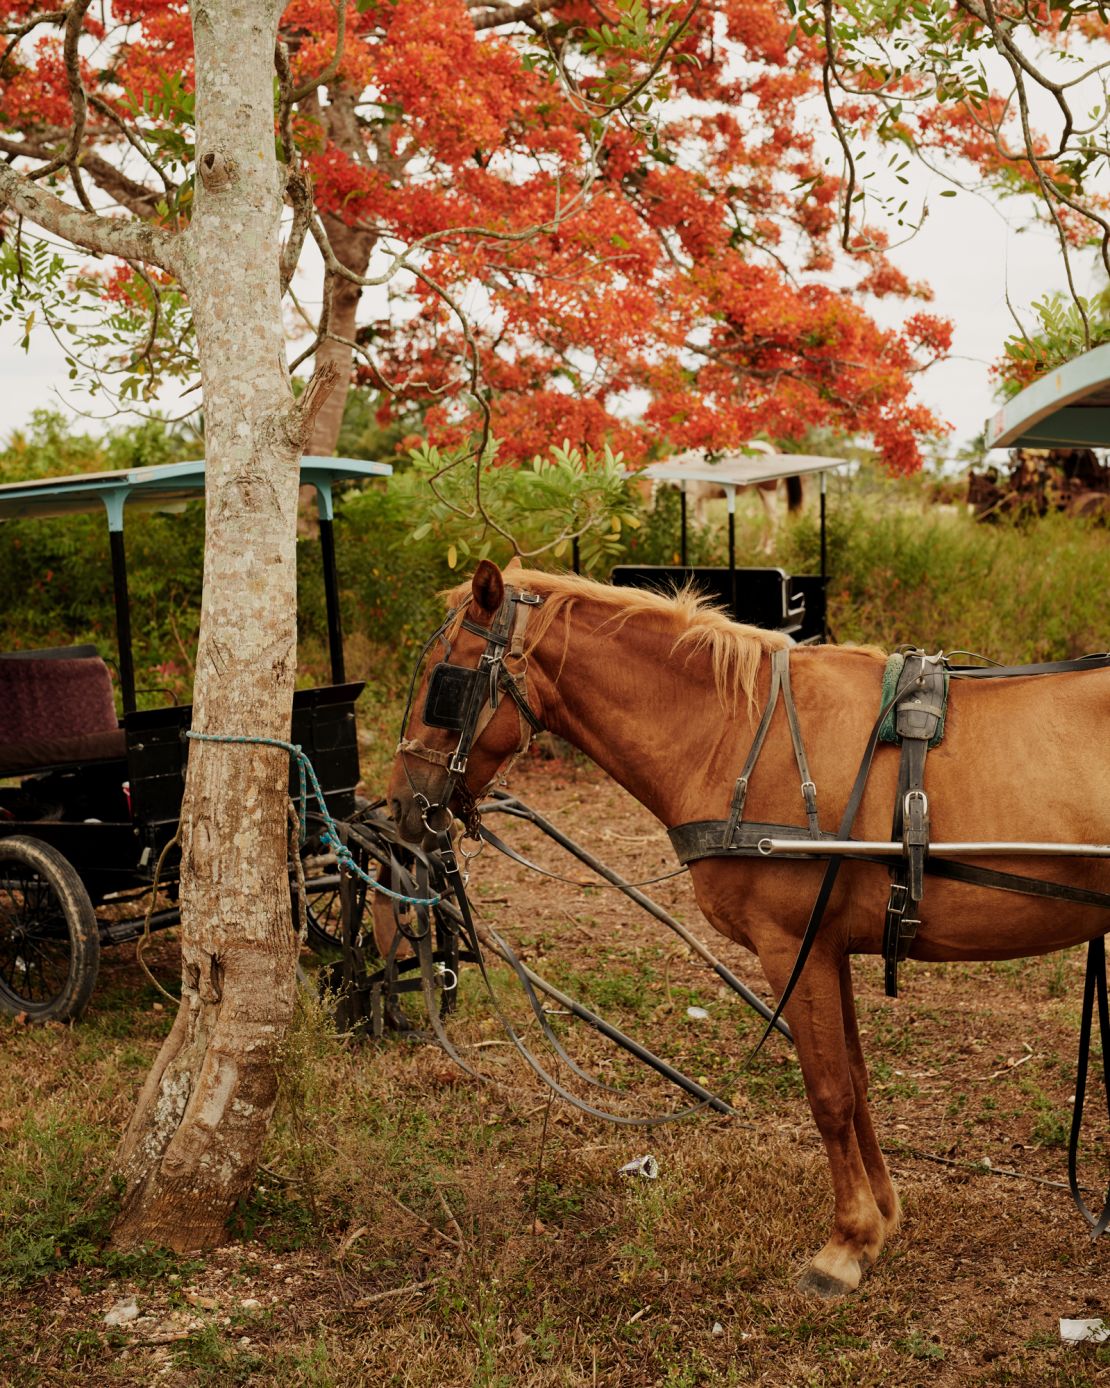 Belize's Mennonites still travel by horse and cart.